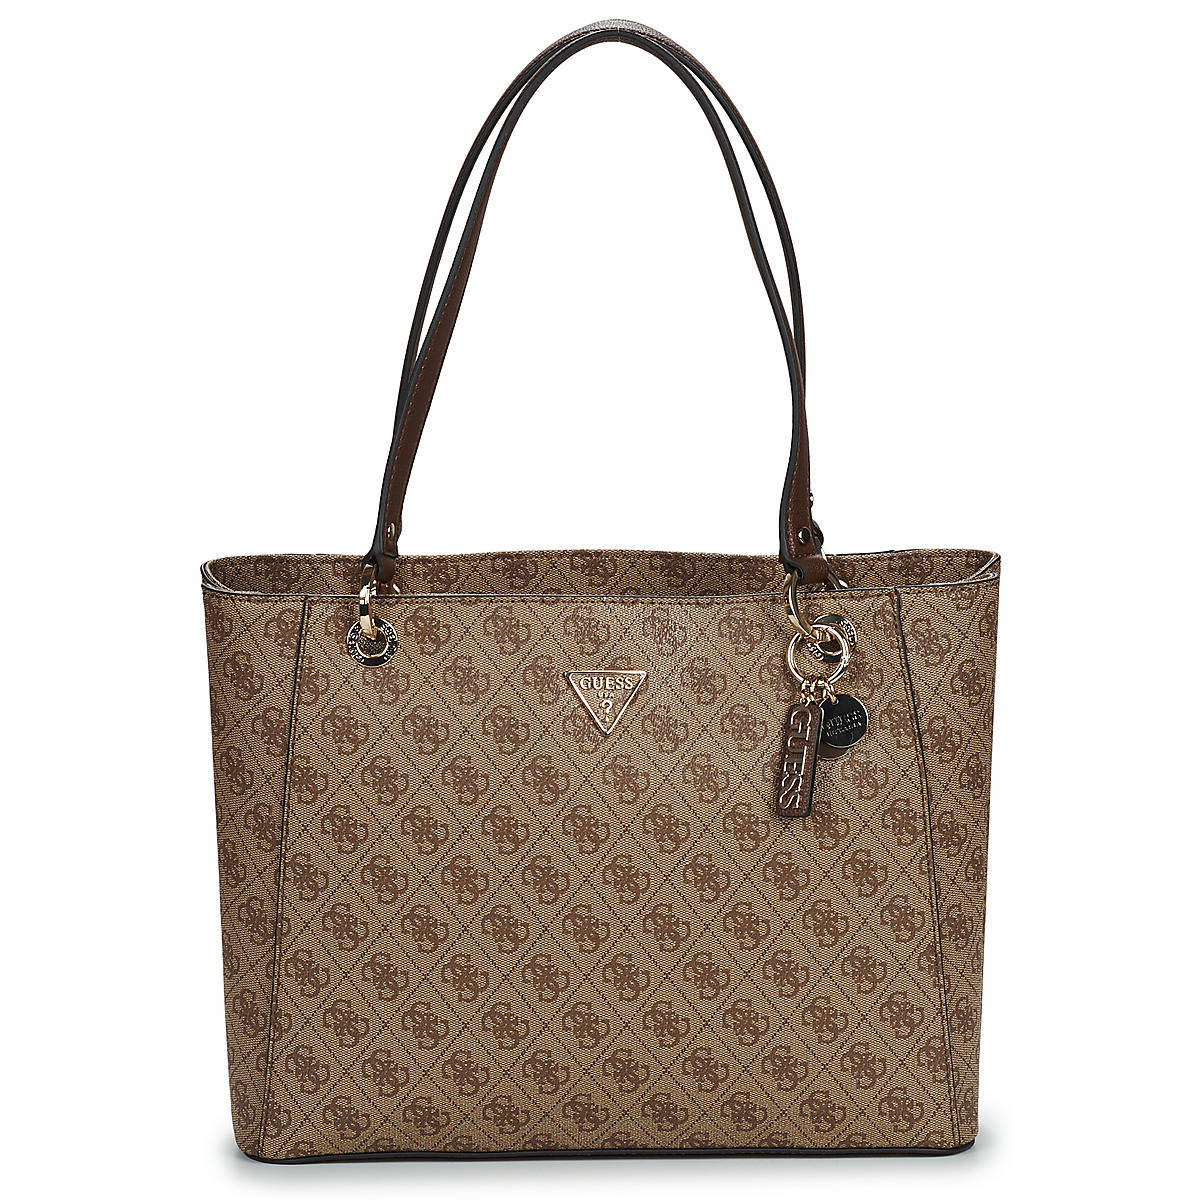 Malas Mulher Cabas / Sac shopping Guess NOELLE Camel